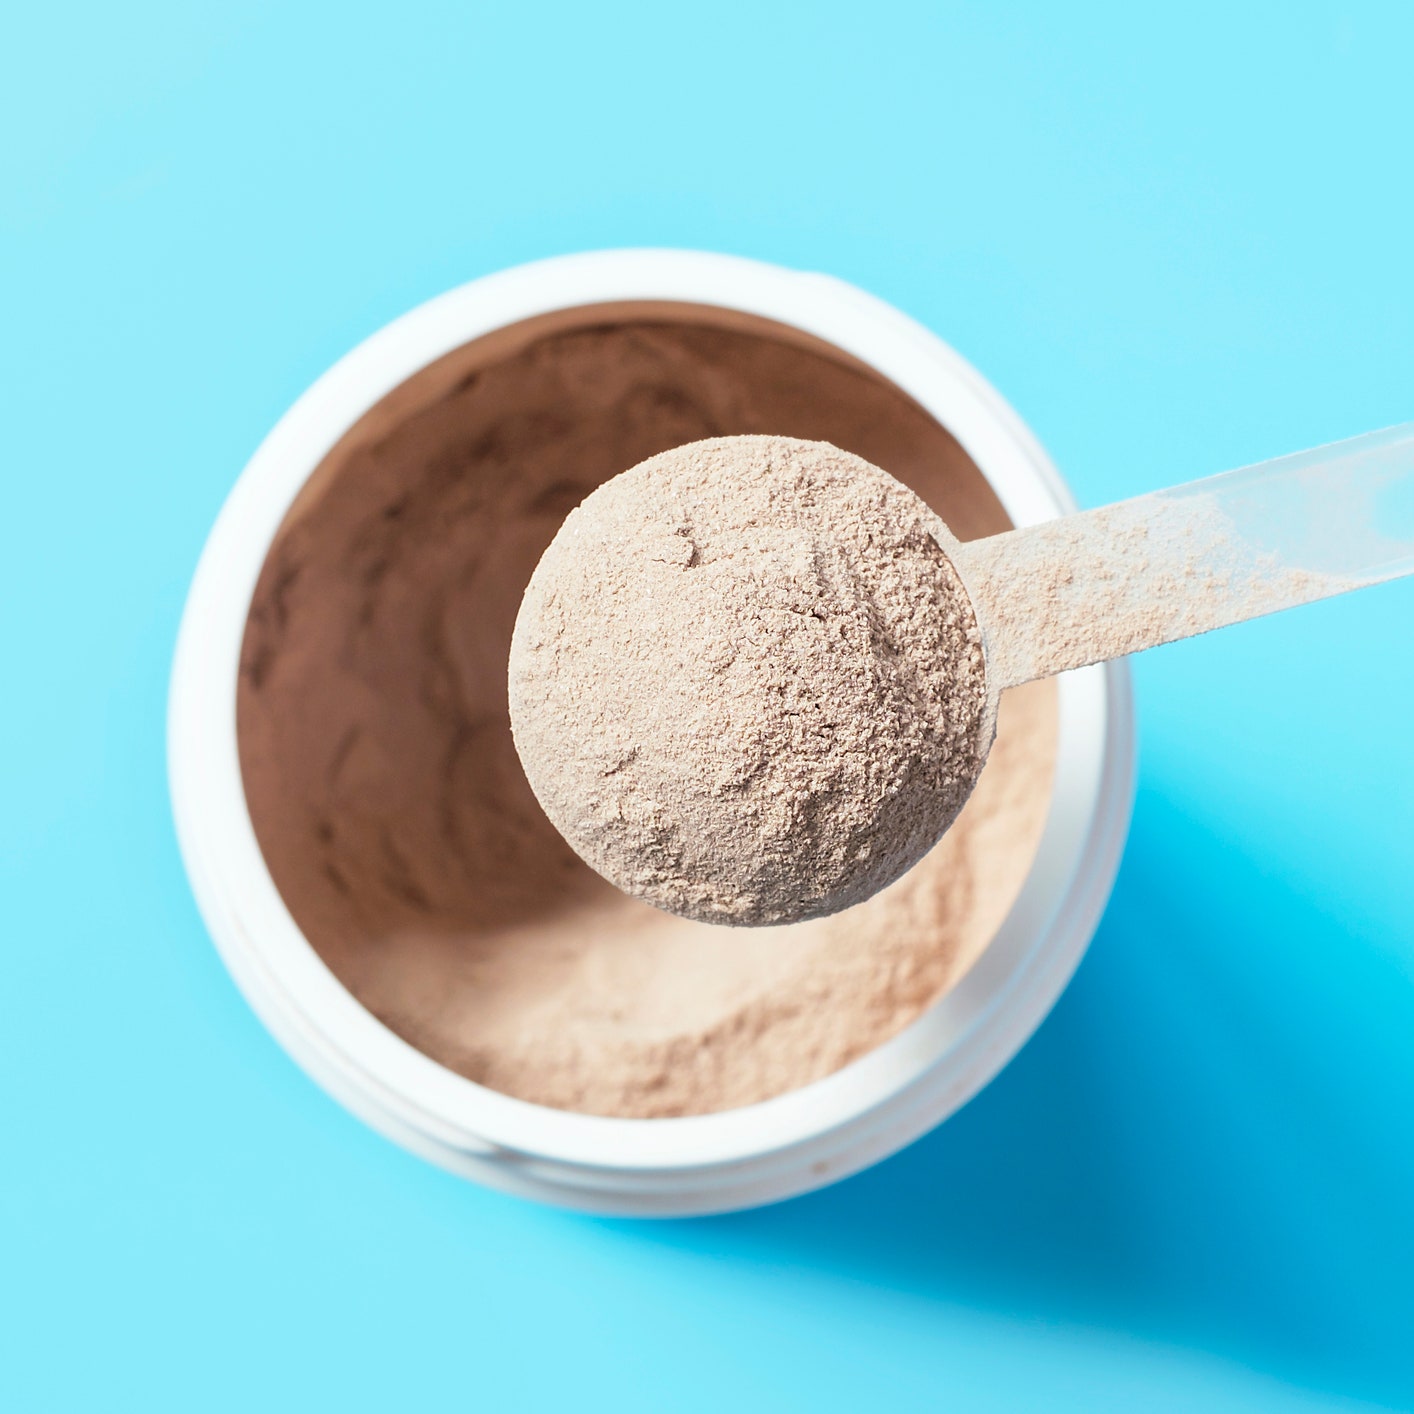 Some Vital Proteins Collagen Peptides Powder Has Been Recalled&#8212;Here’s What to Know